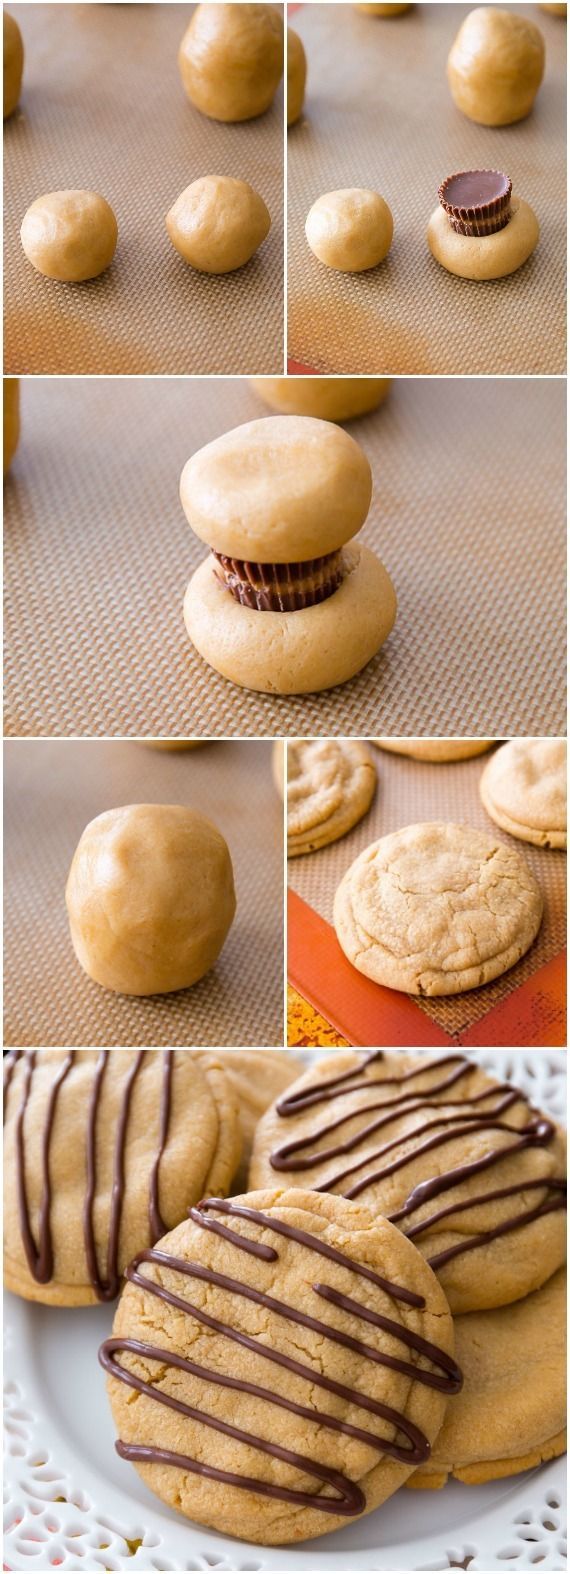 Reese’s Stuffed Peanut Butter Cookies. Soft, chewy, and overloaded with peanut but